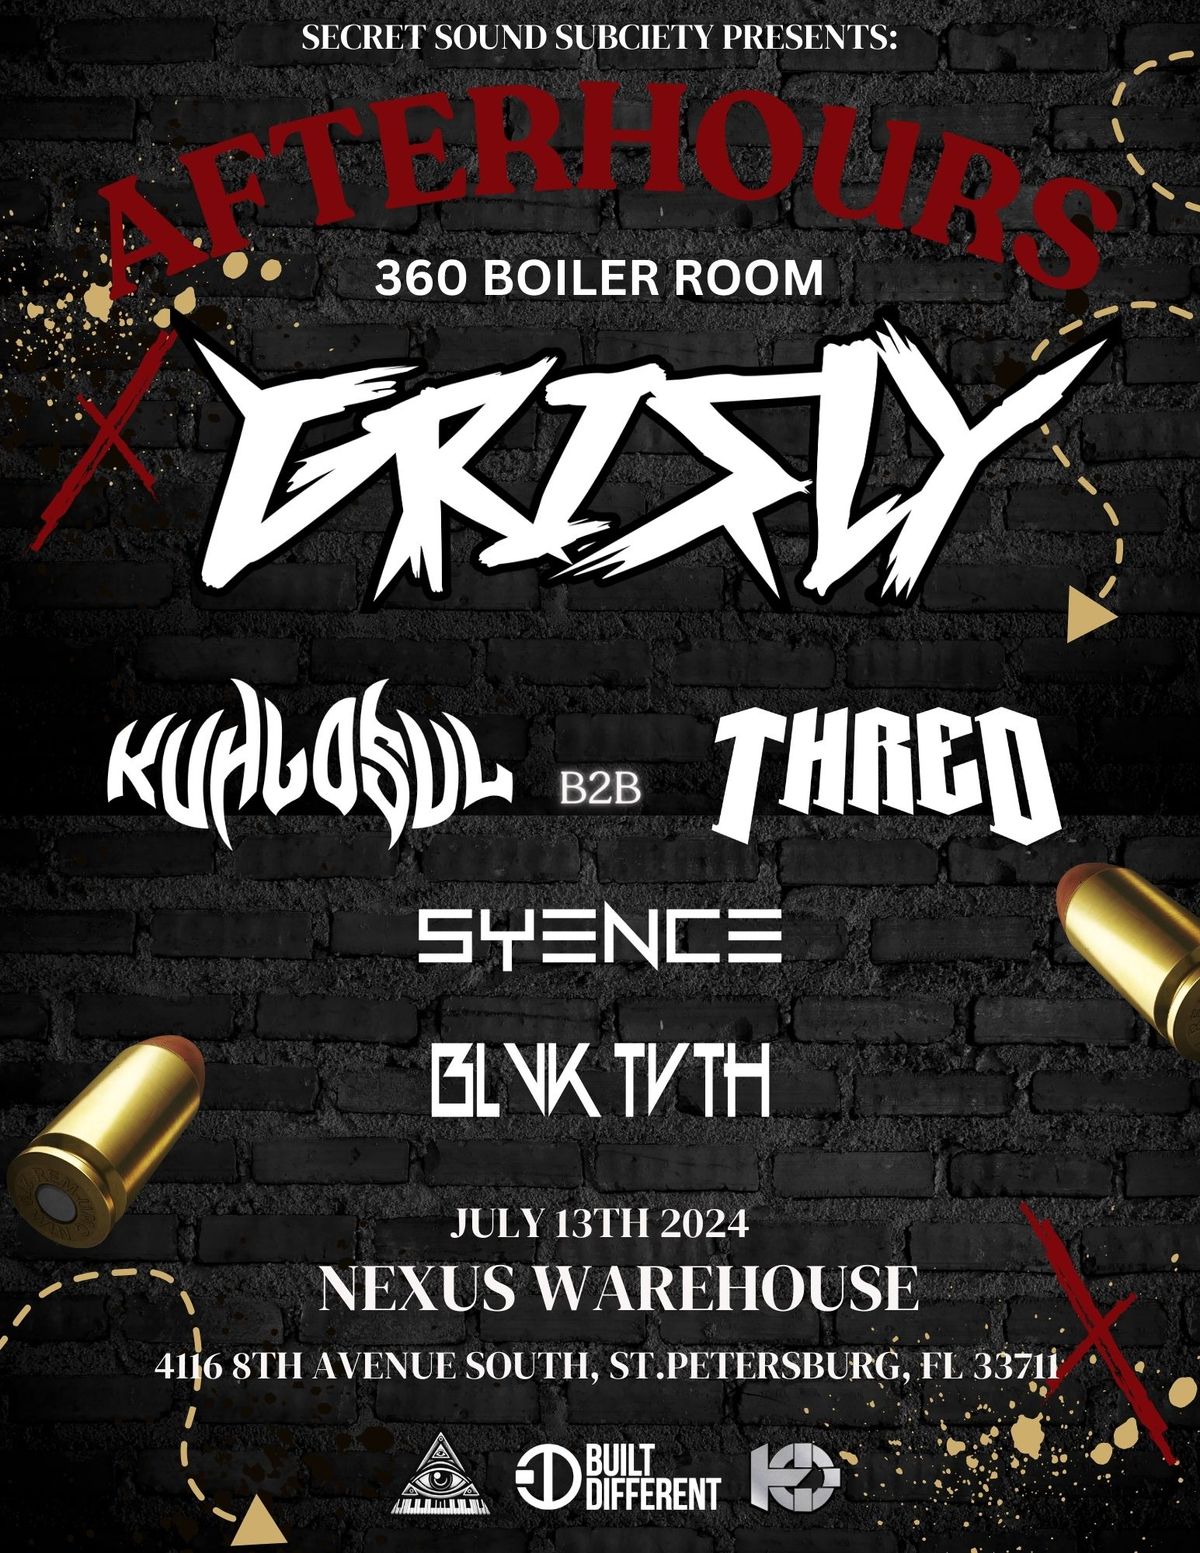 Afterhours at Nexus Warehouse featuring Grisly and friends